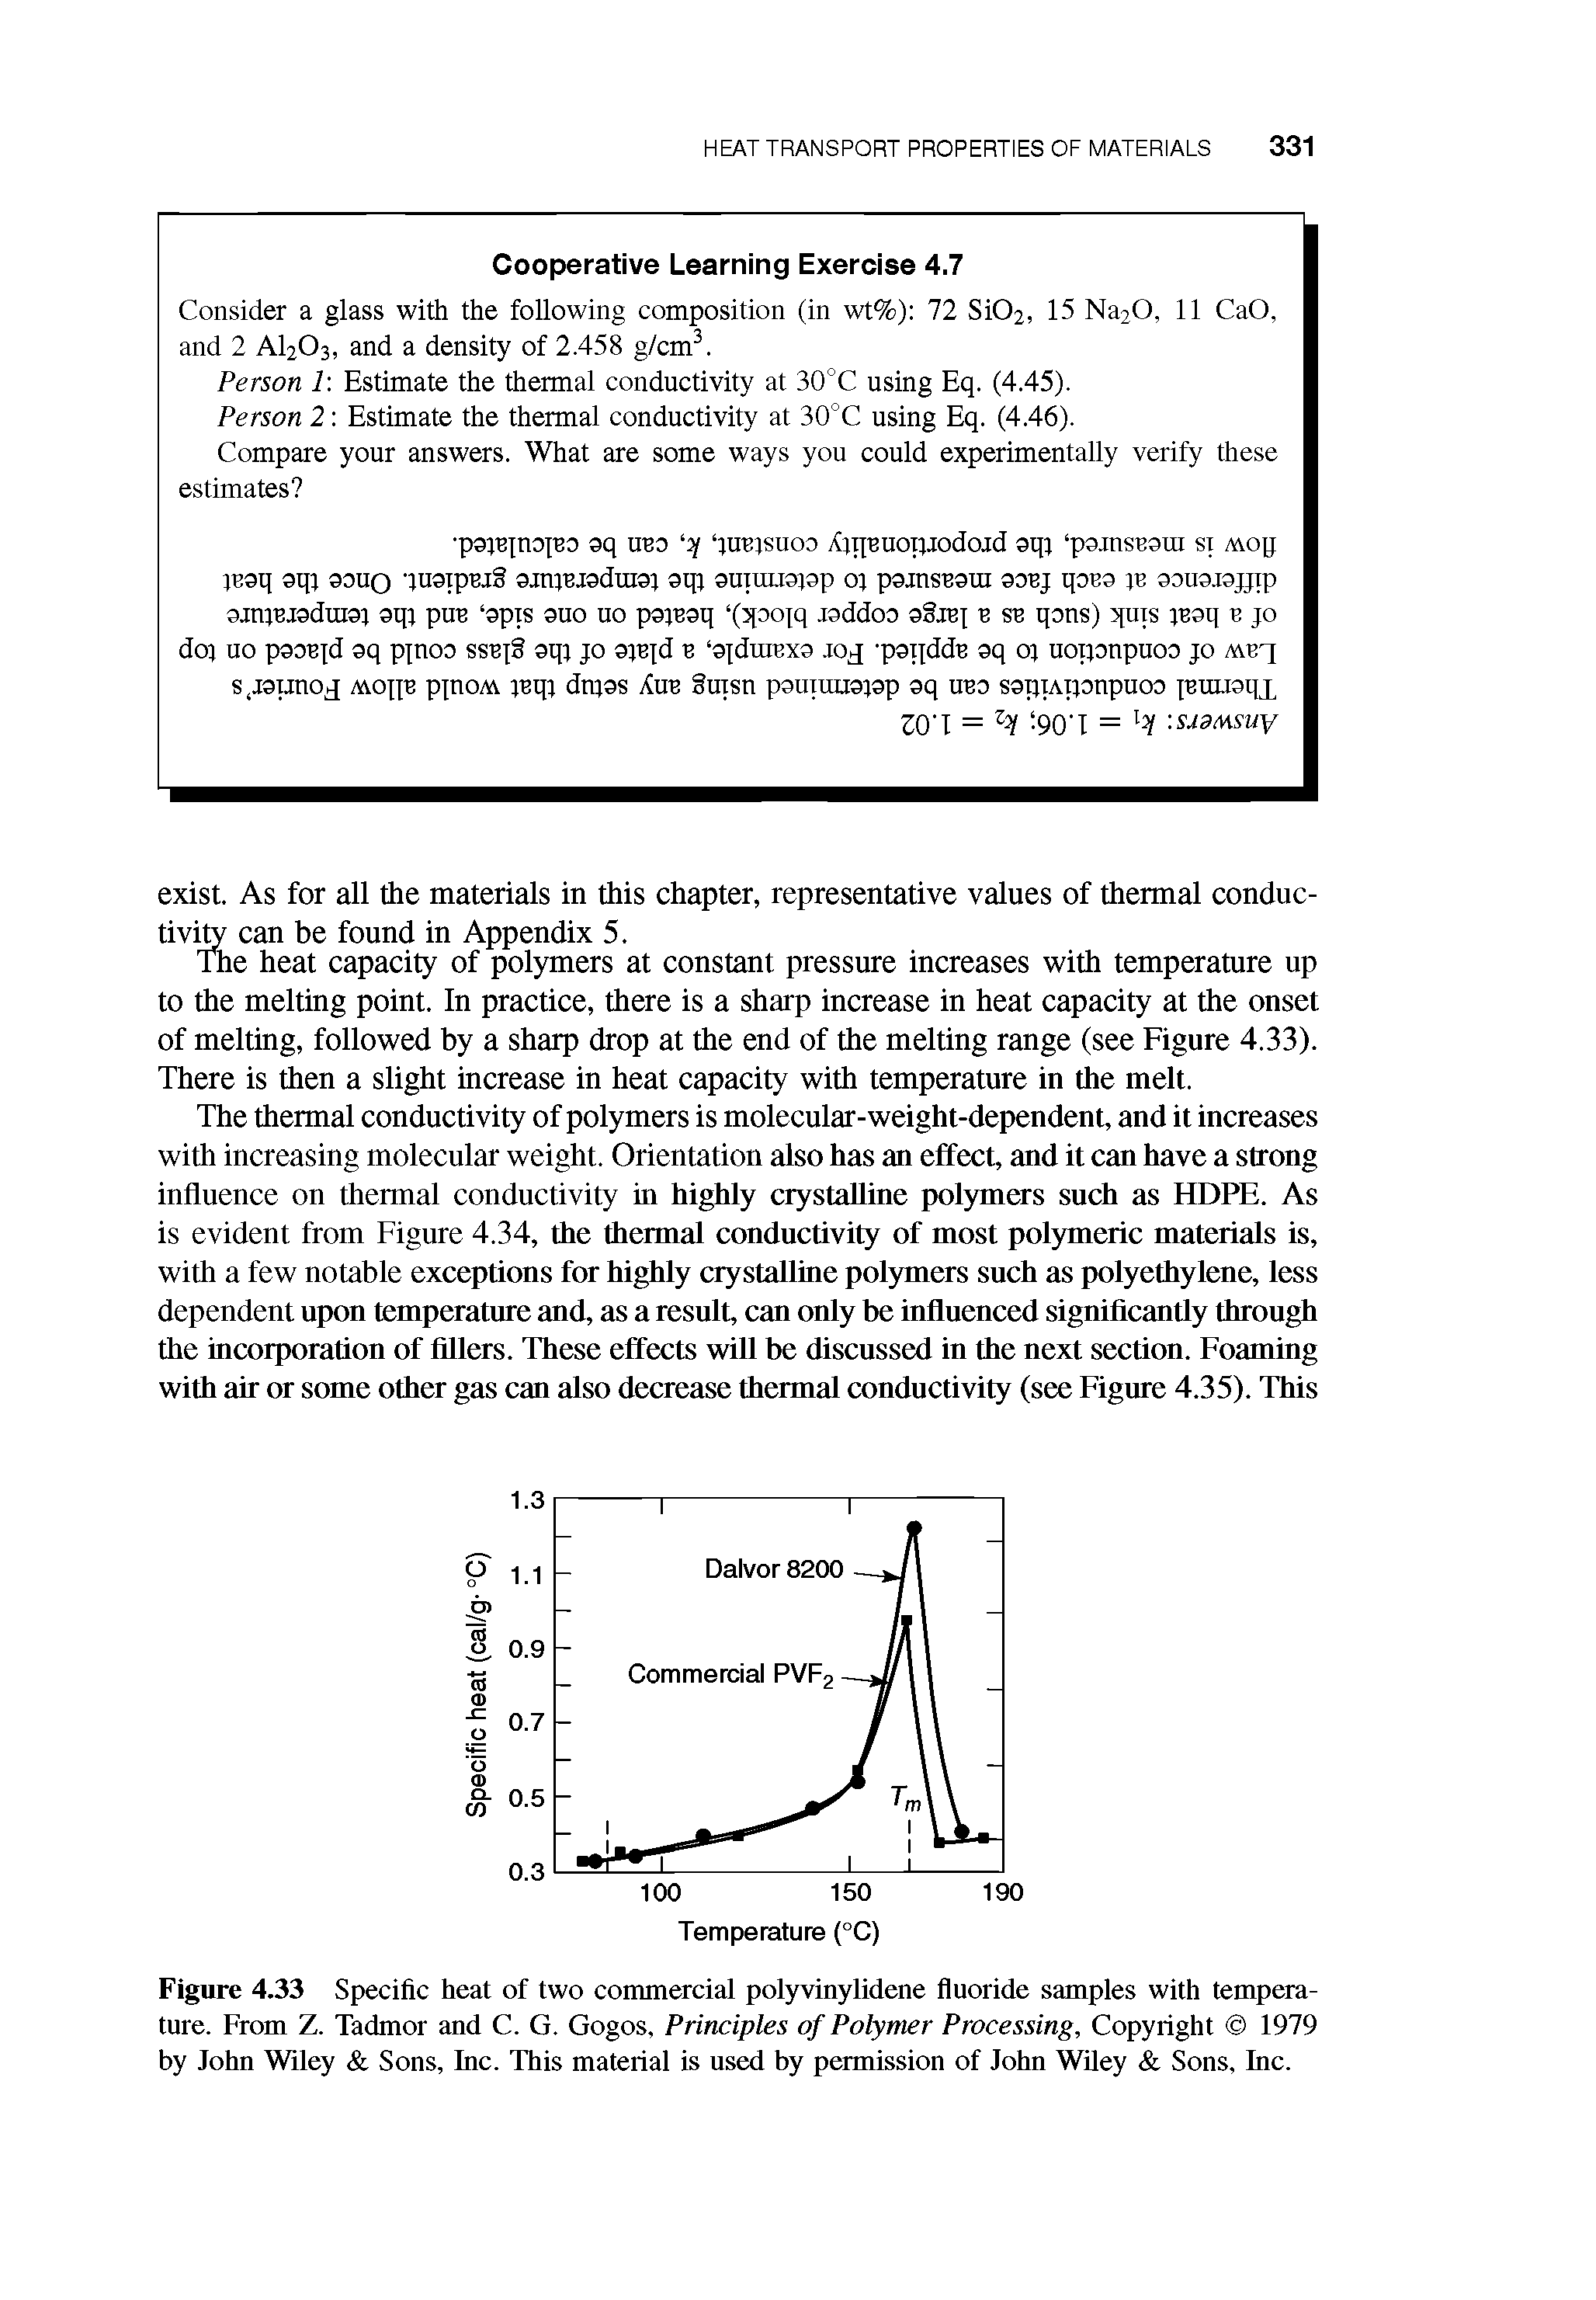 Figure 4.33 Specific heat of two commercial polyvinylidene fluoride samples with temperature. From Z. Tadmor and C. G. Gogos, Principles of Polymer Processing, Copyright 1979 by John Wiley Sons, Inc. This material is nsed by permission of John WUey Sons, Inc.